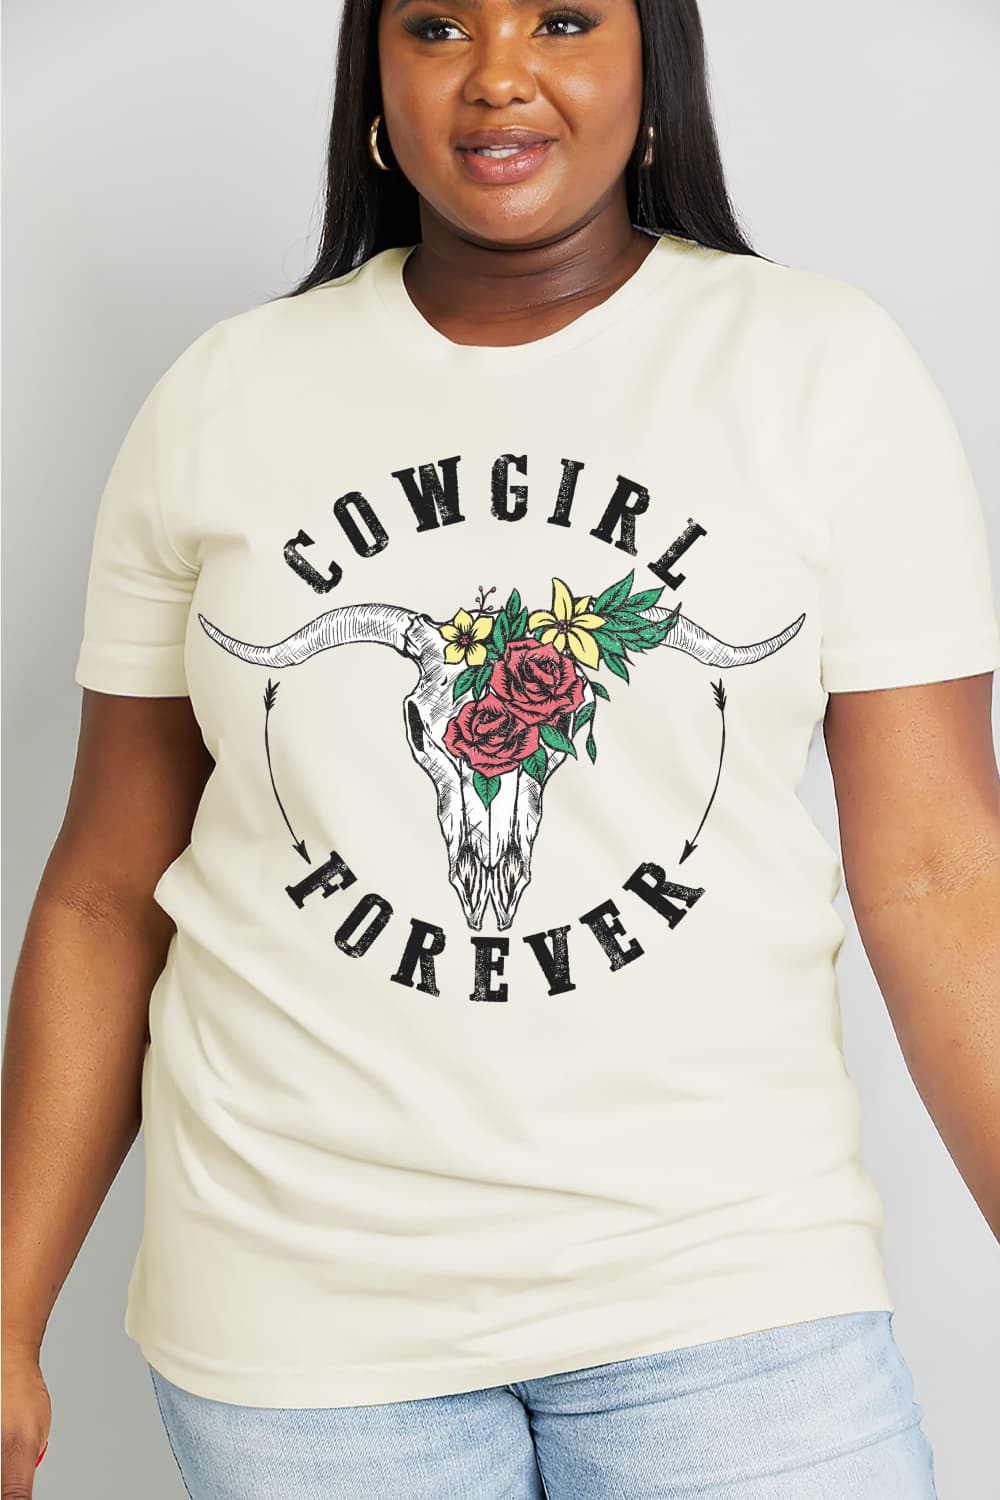 Simply Love Full Size COWGIRL FOREVER Graphic Cotton Tee